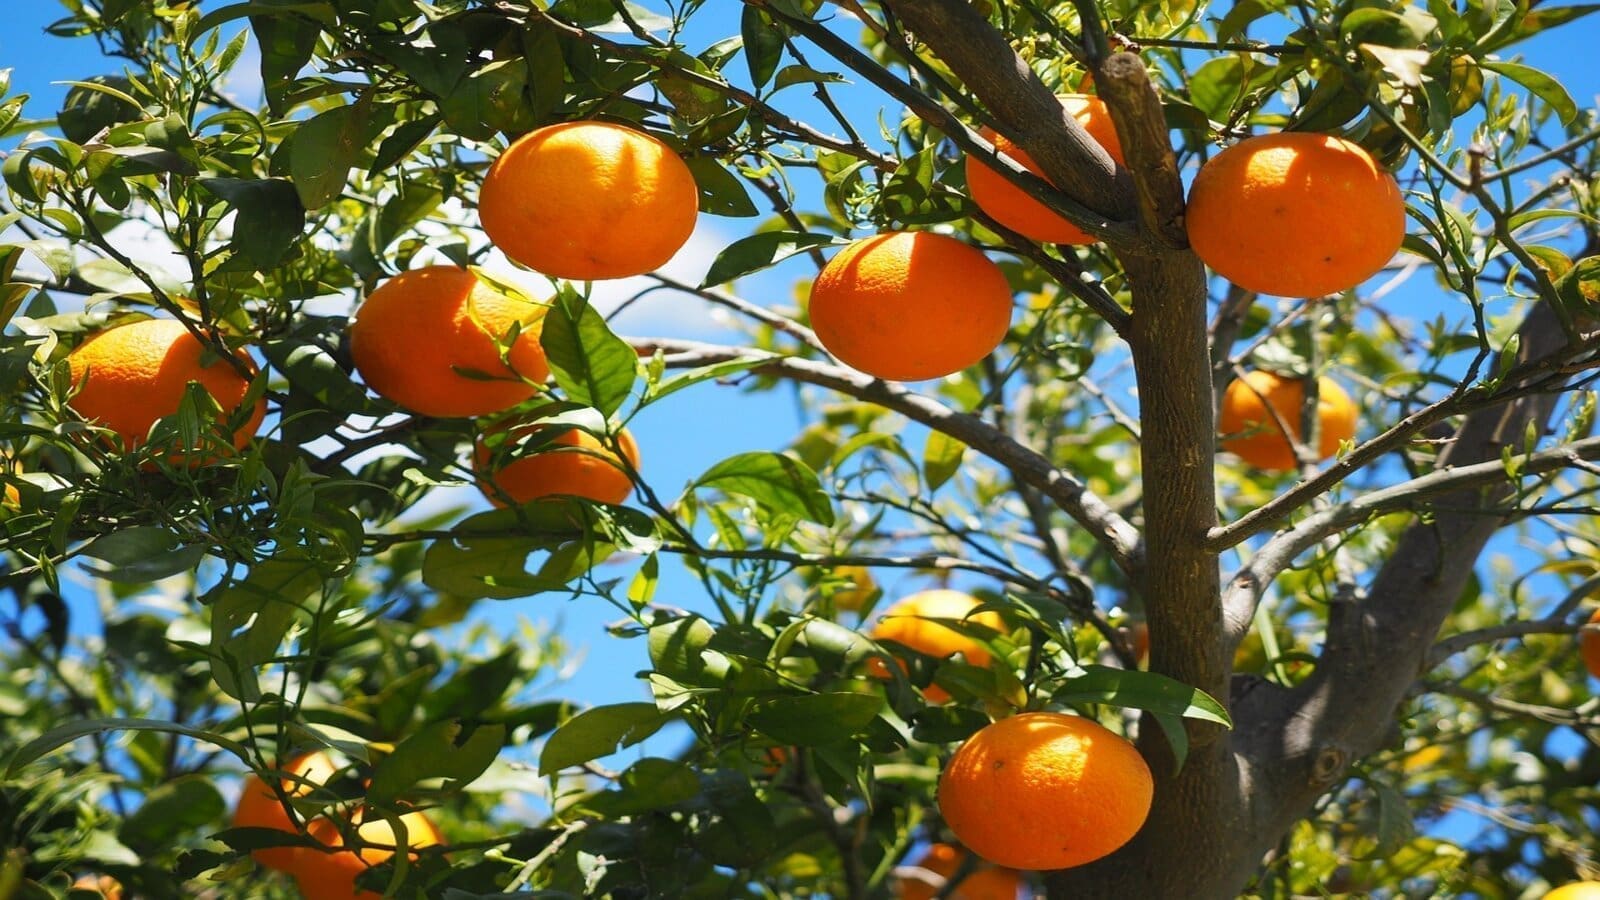 South Africa’s Black Citrus Growers Programme proves successful